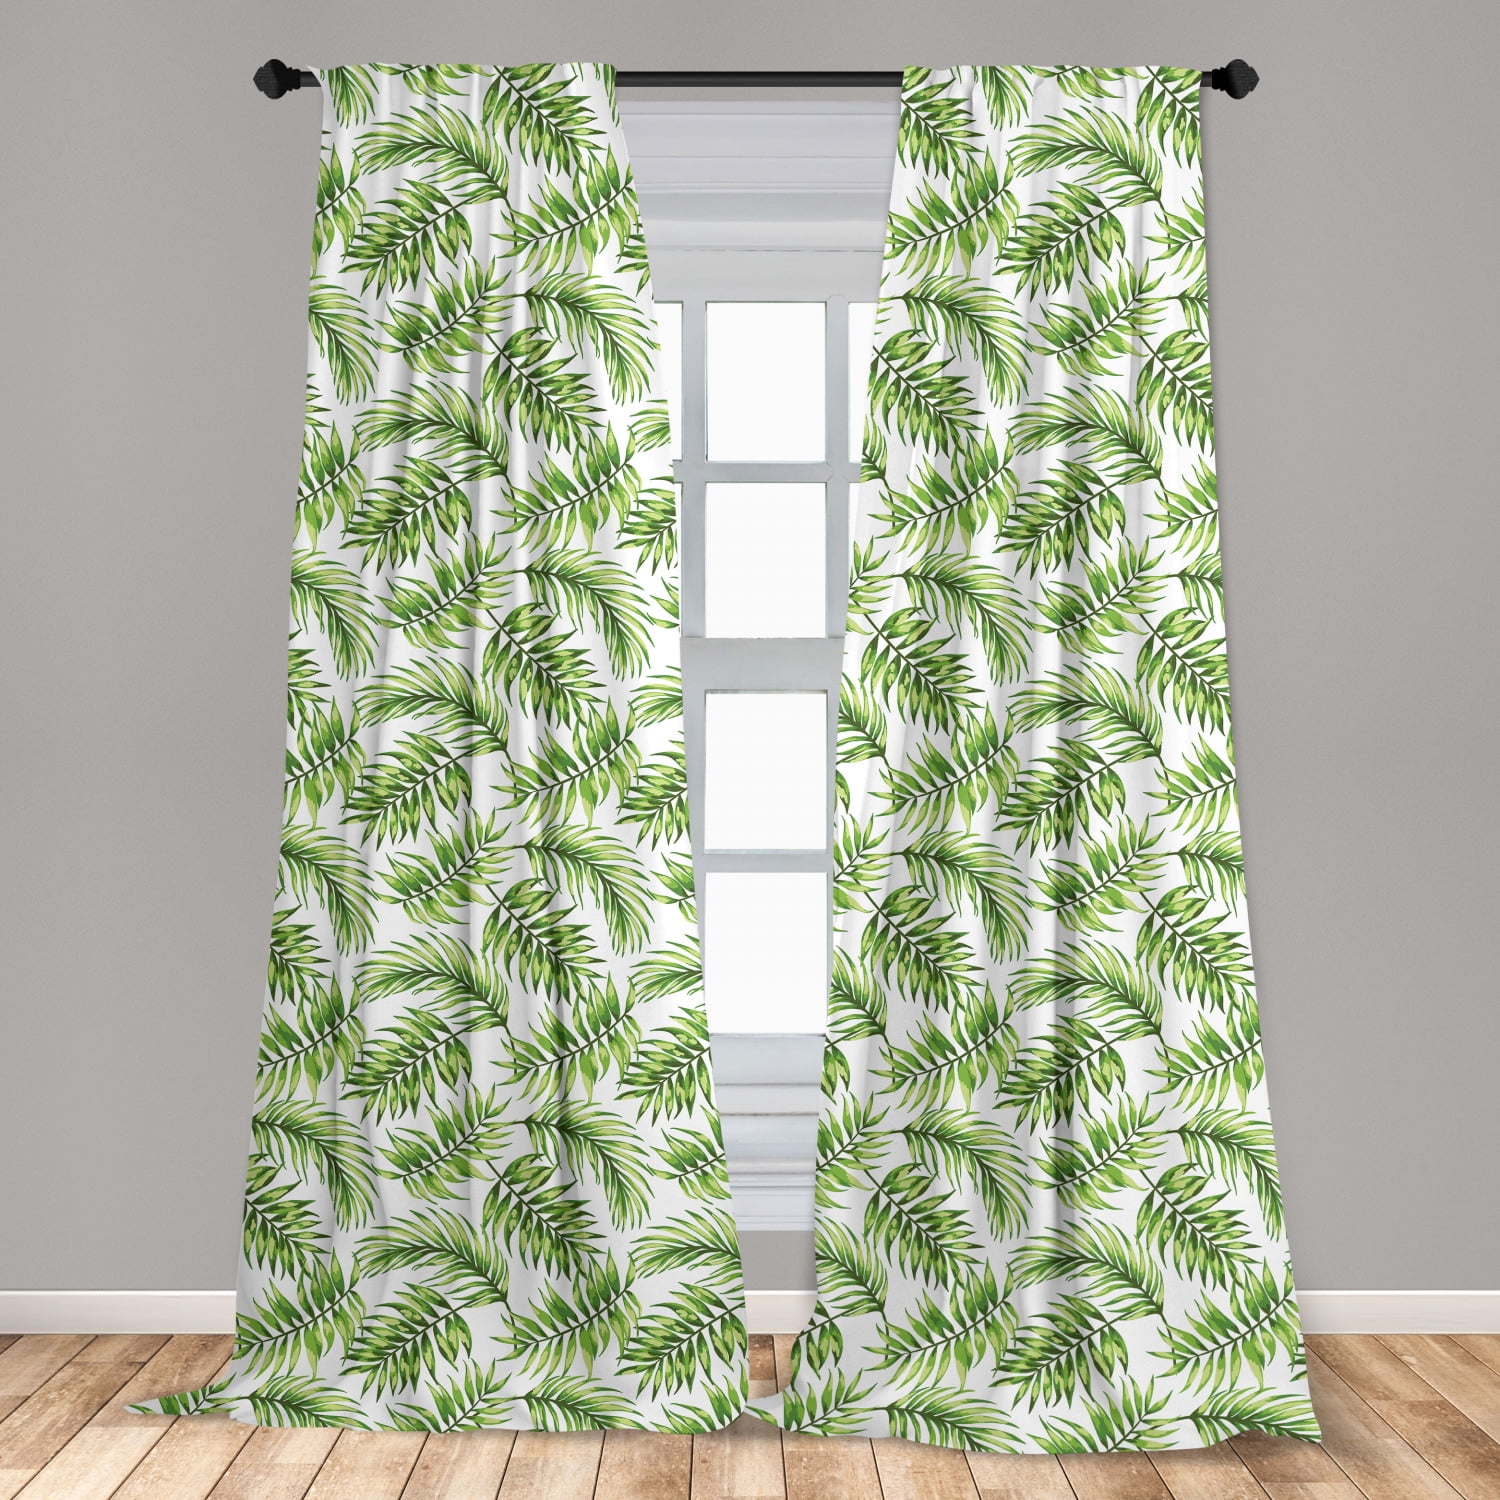 3D Bamboo Palm Leaves Blockout Photo Print Curtain 2Panels Drapes Fabric Window 